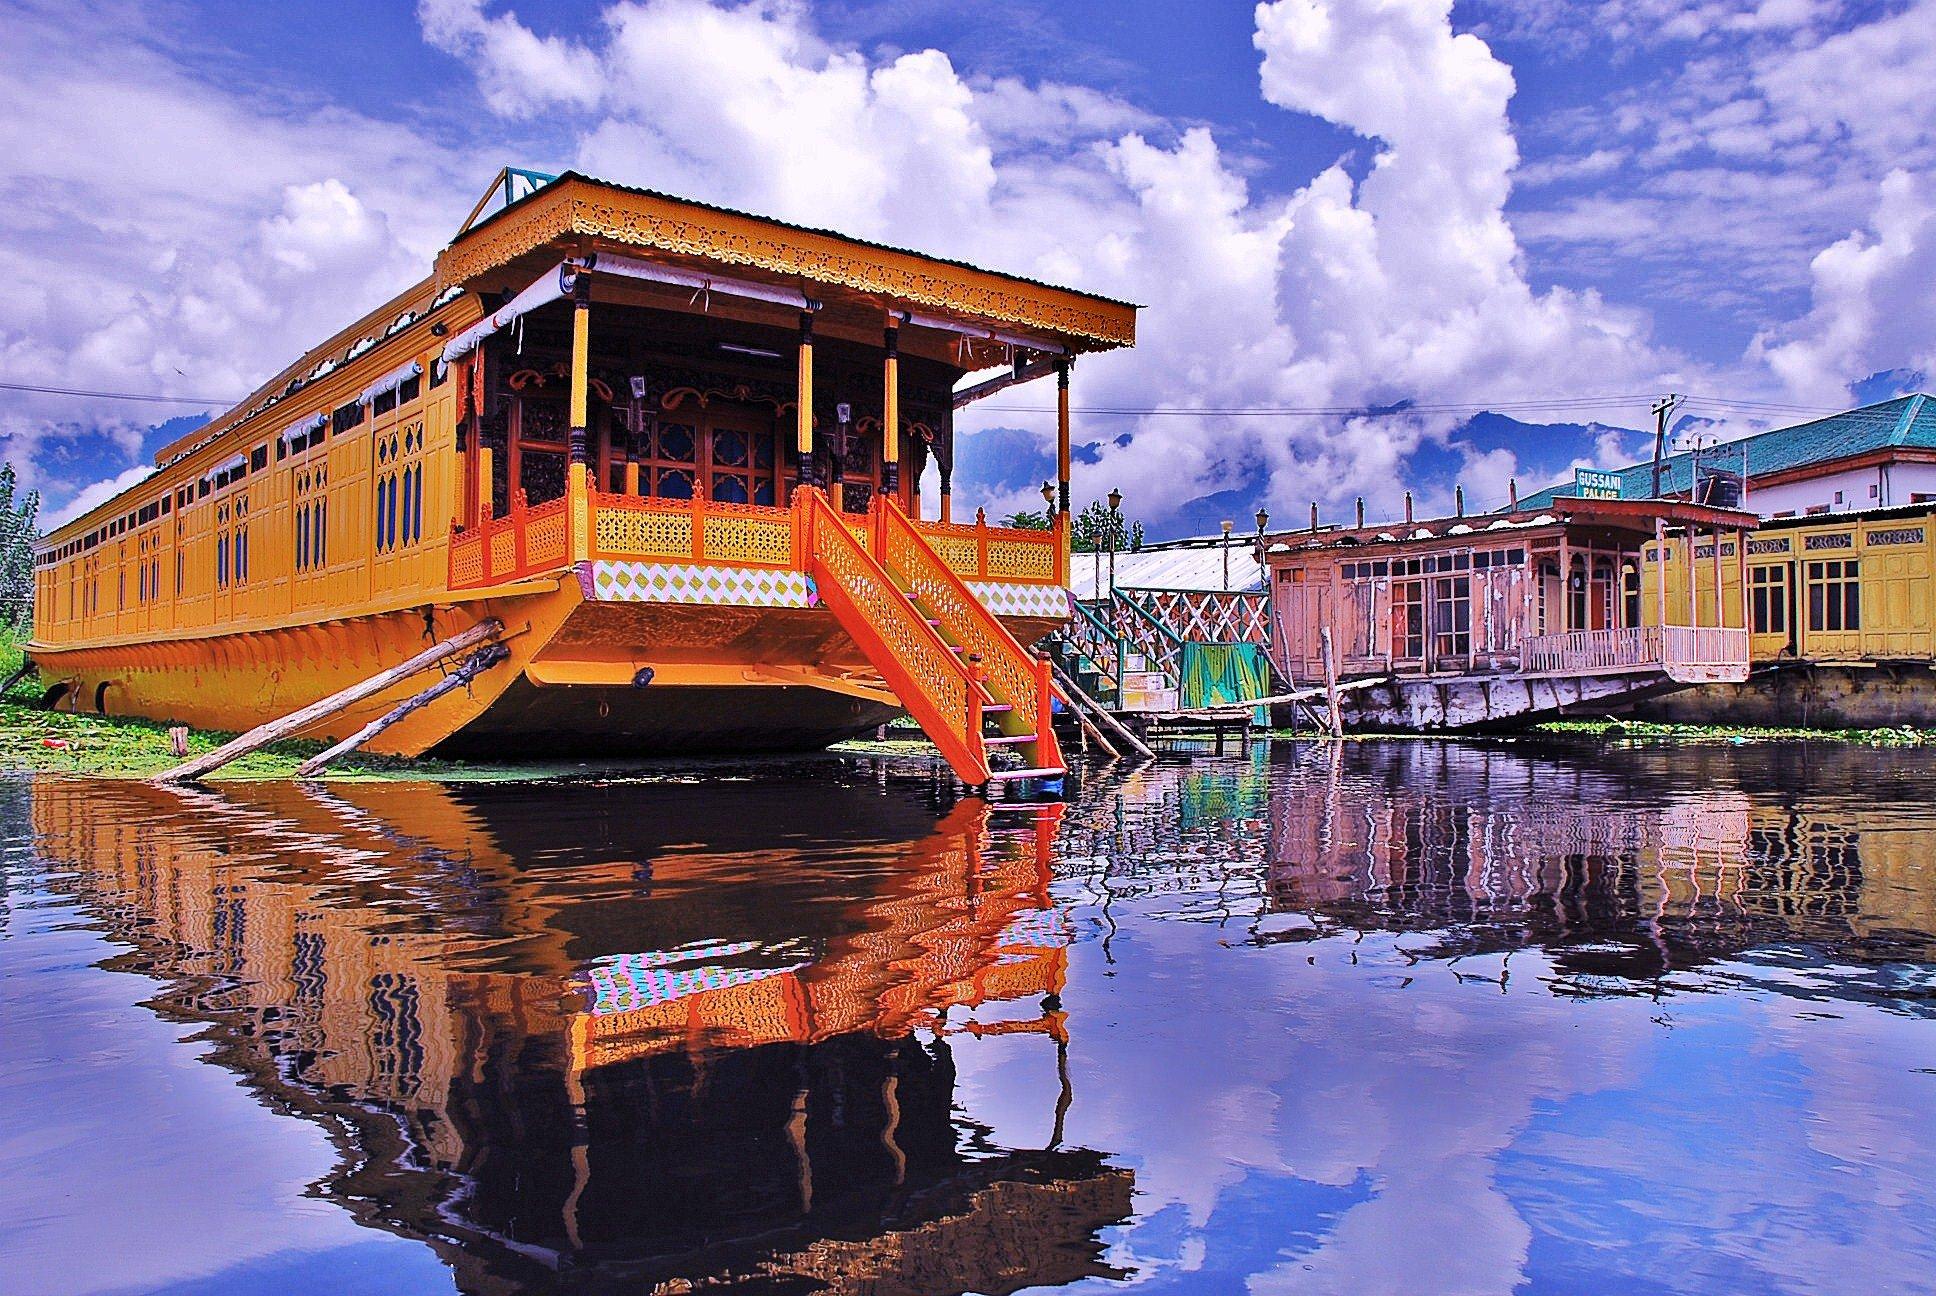 Jammu Kashmir tour packages from Hyderabad, Honeymoon & Family tour packages Operator in Hyd, Best Jammu Kashmir tour packages for couples from Hyd, Tour operators for Kashmir